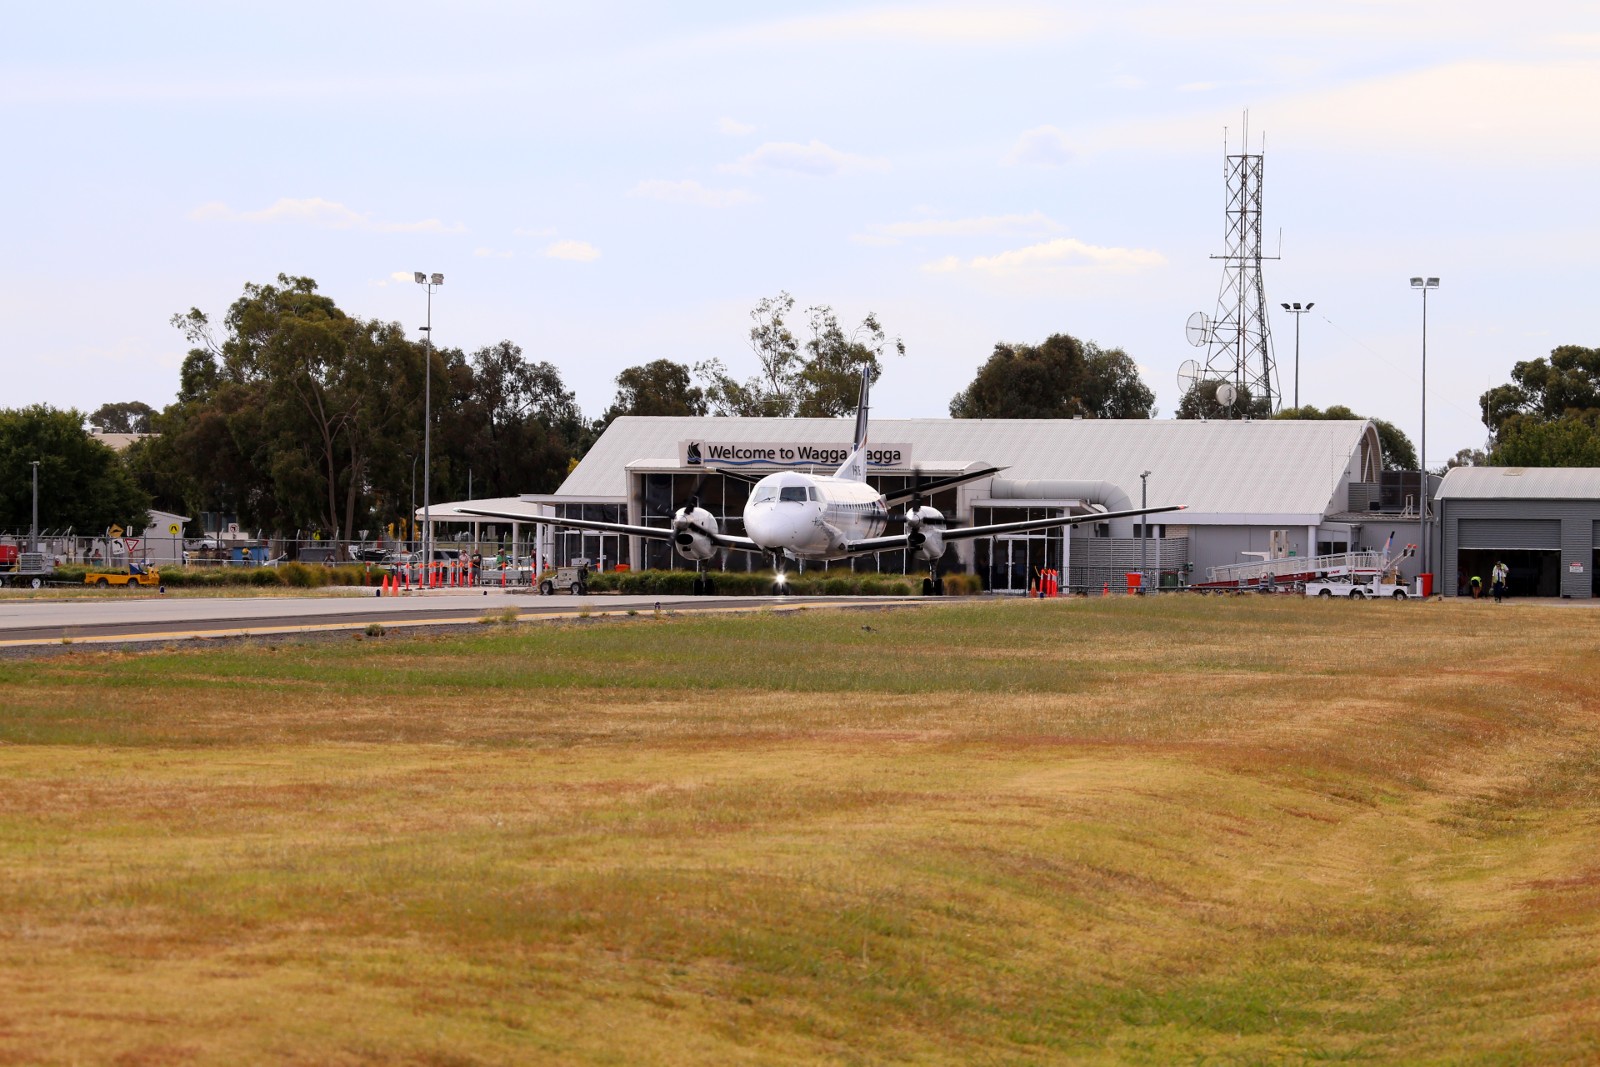 Rex plane taxiing out to runway with Wagga Wagga Airport terminal in background